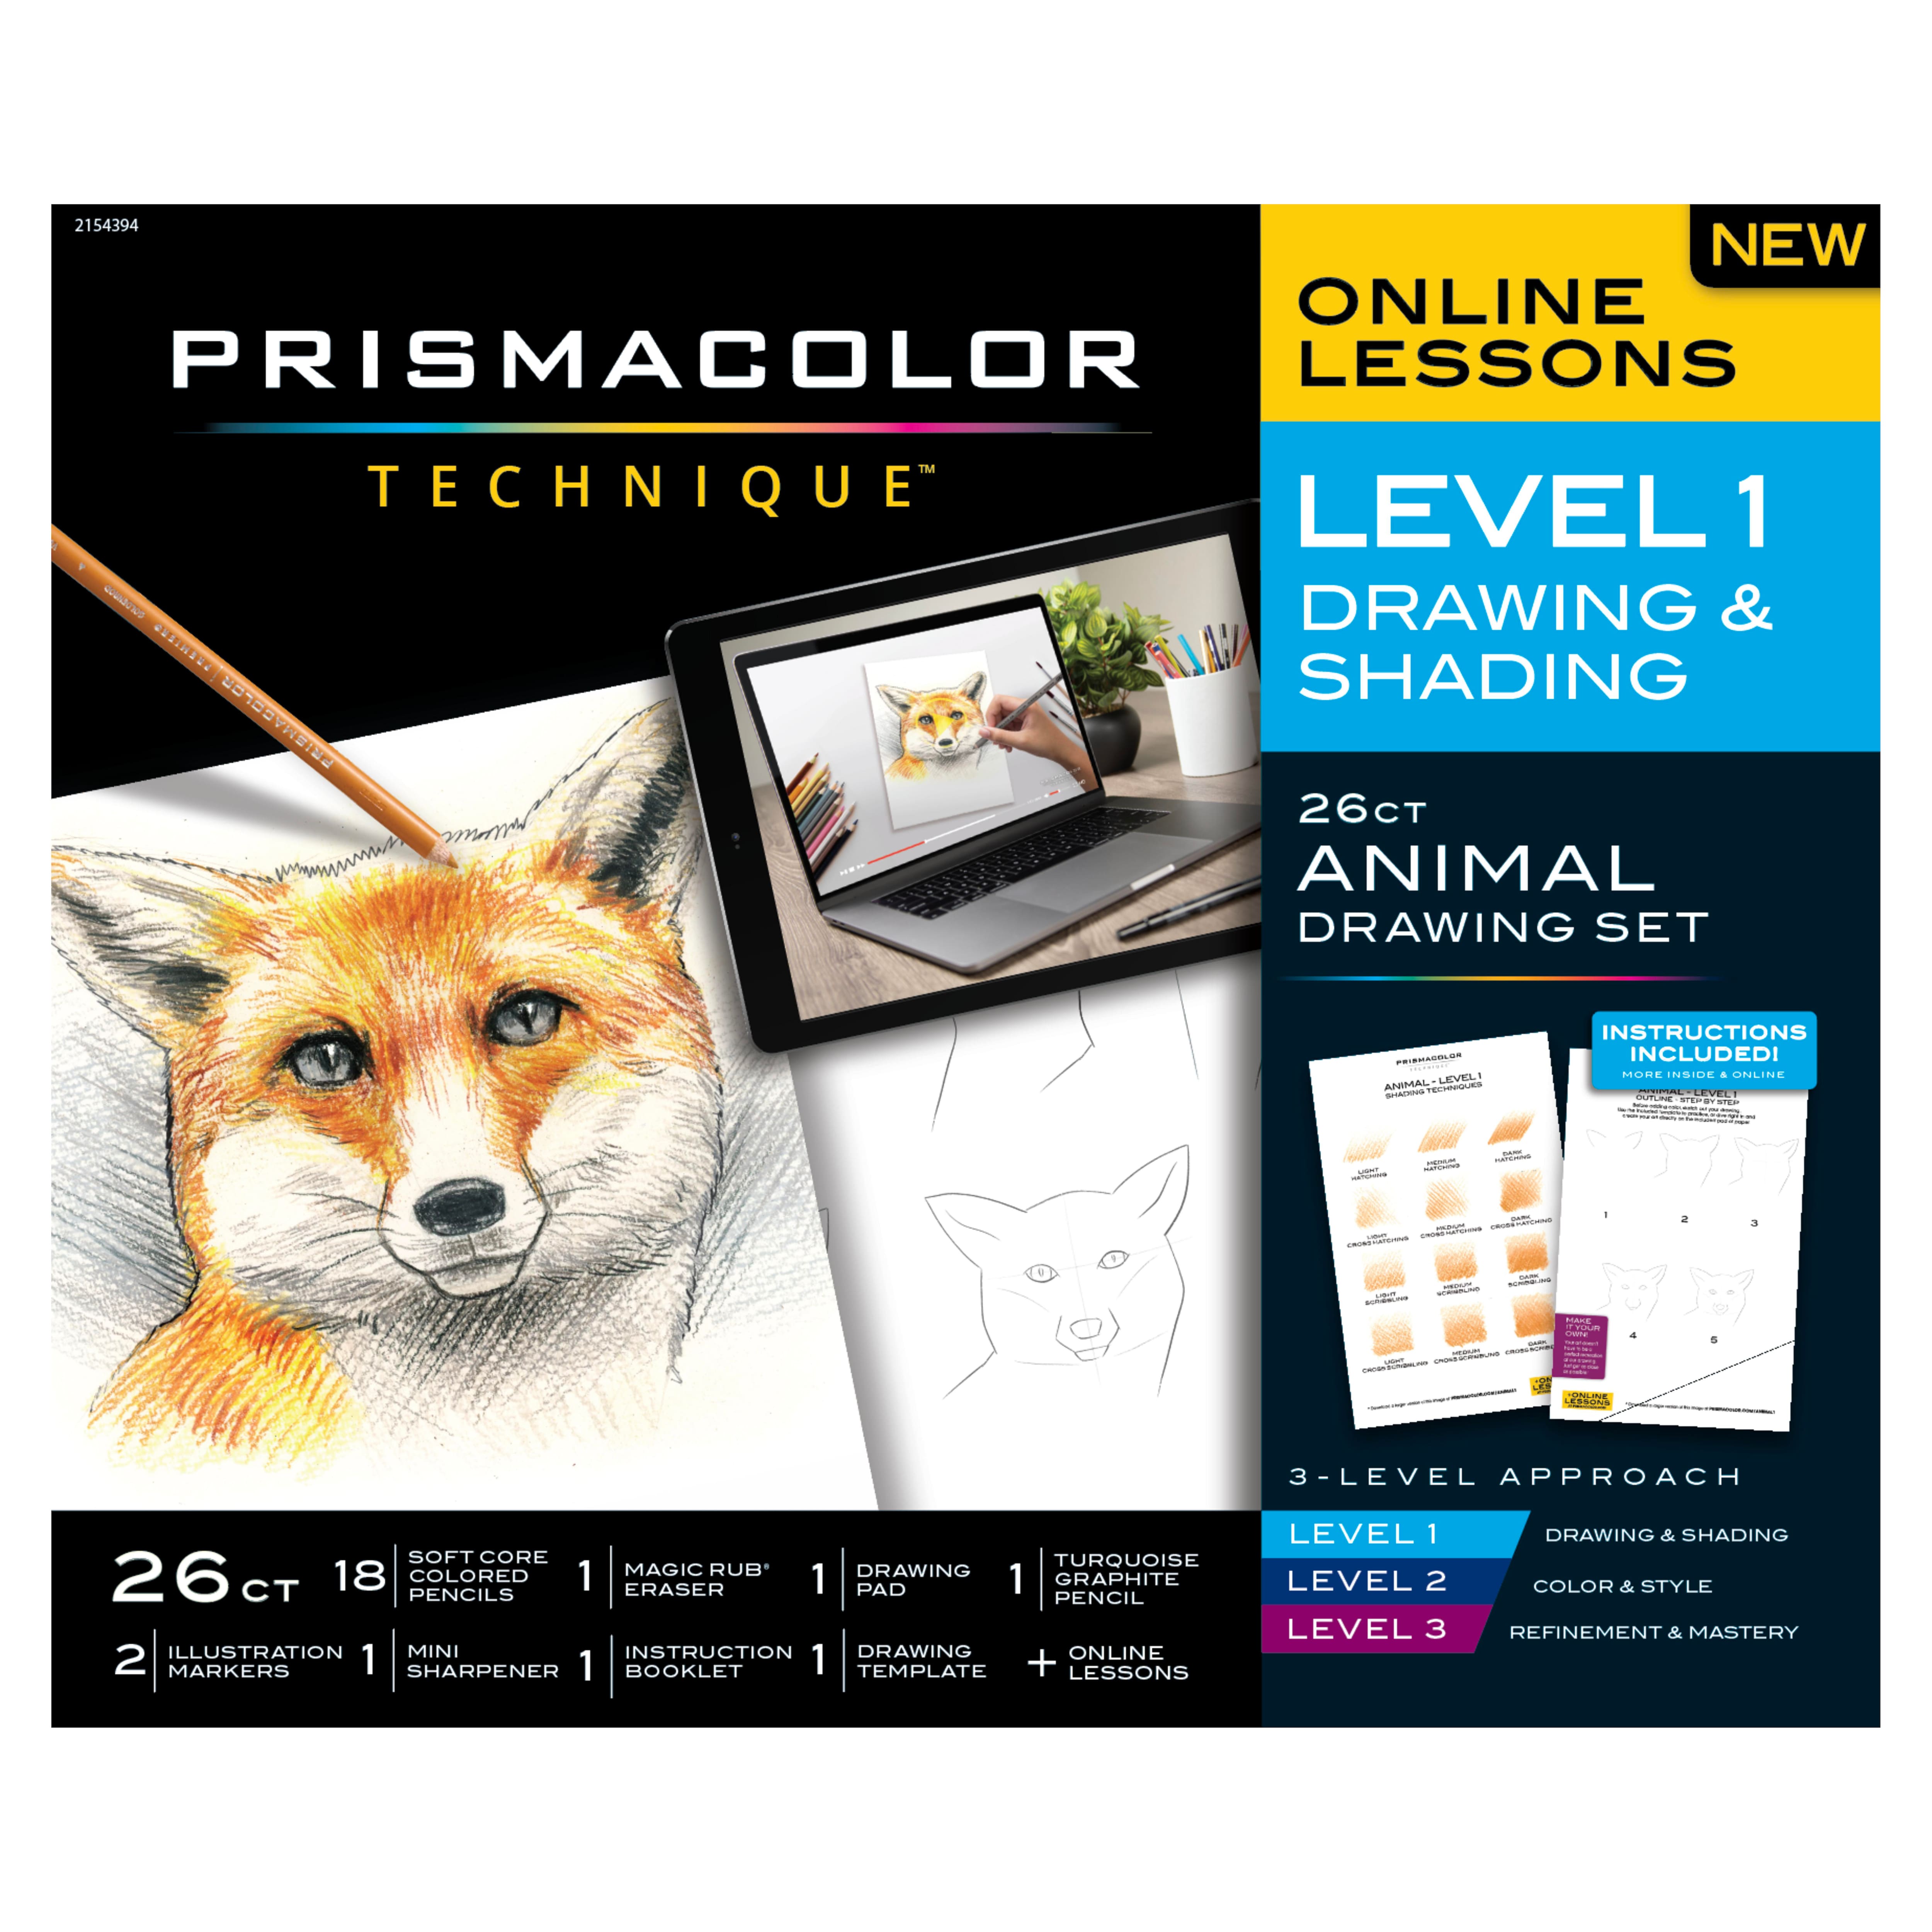 Prismacolor Technique Level 1 Lesson 1 Drawing & Shading Animal